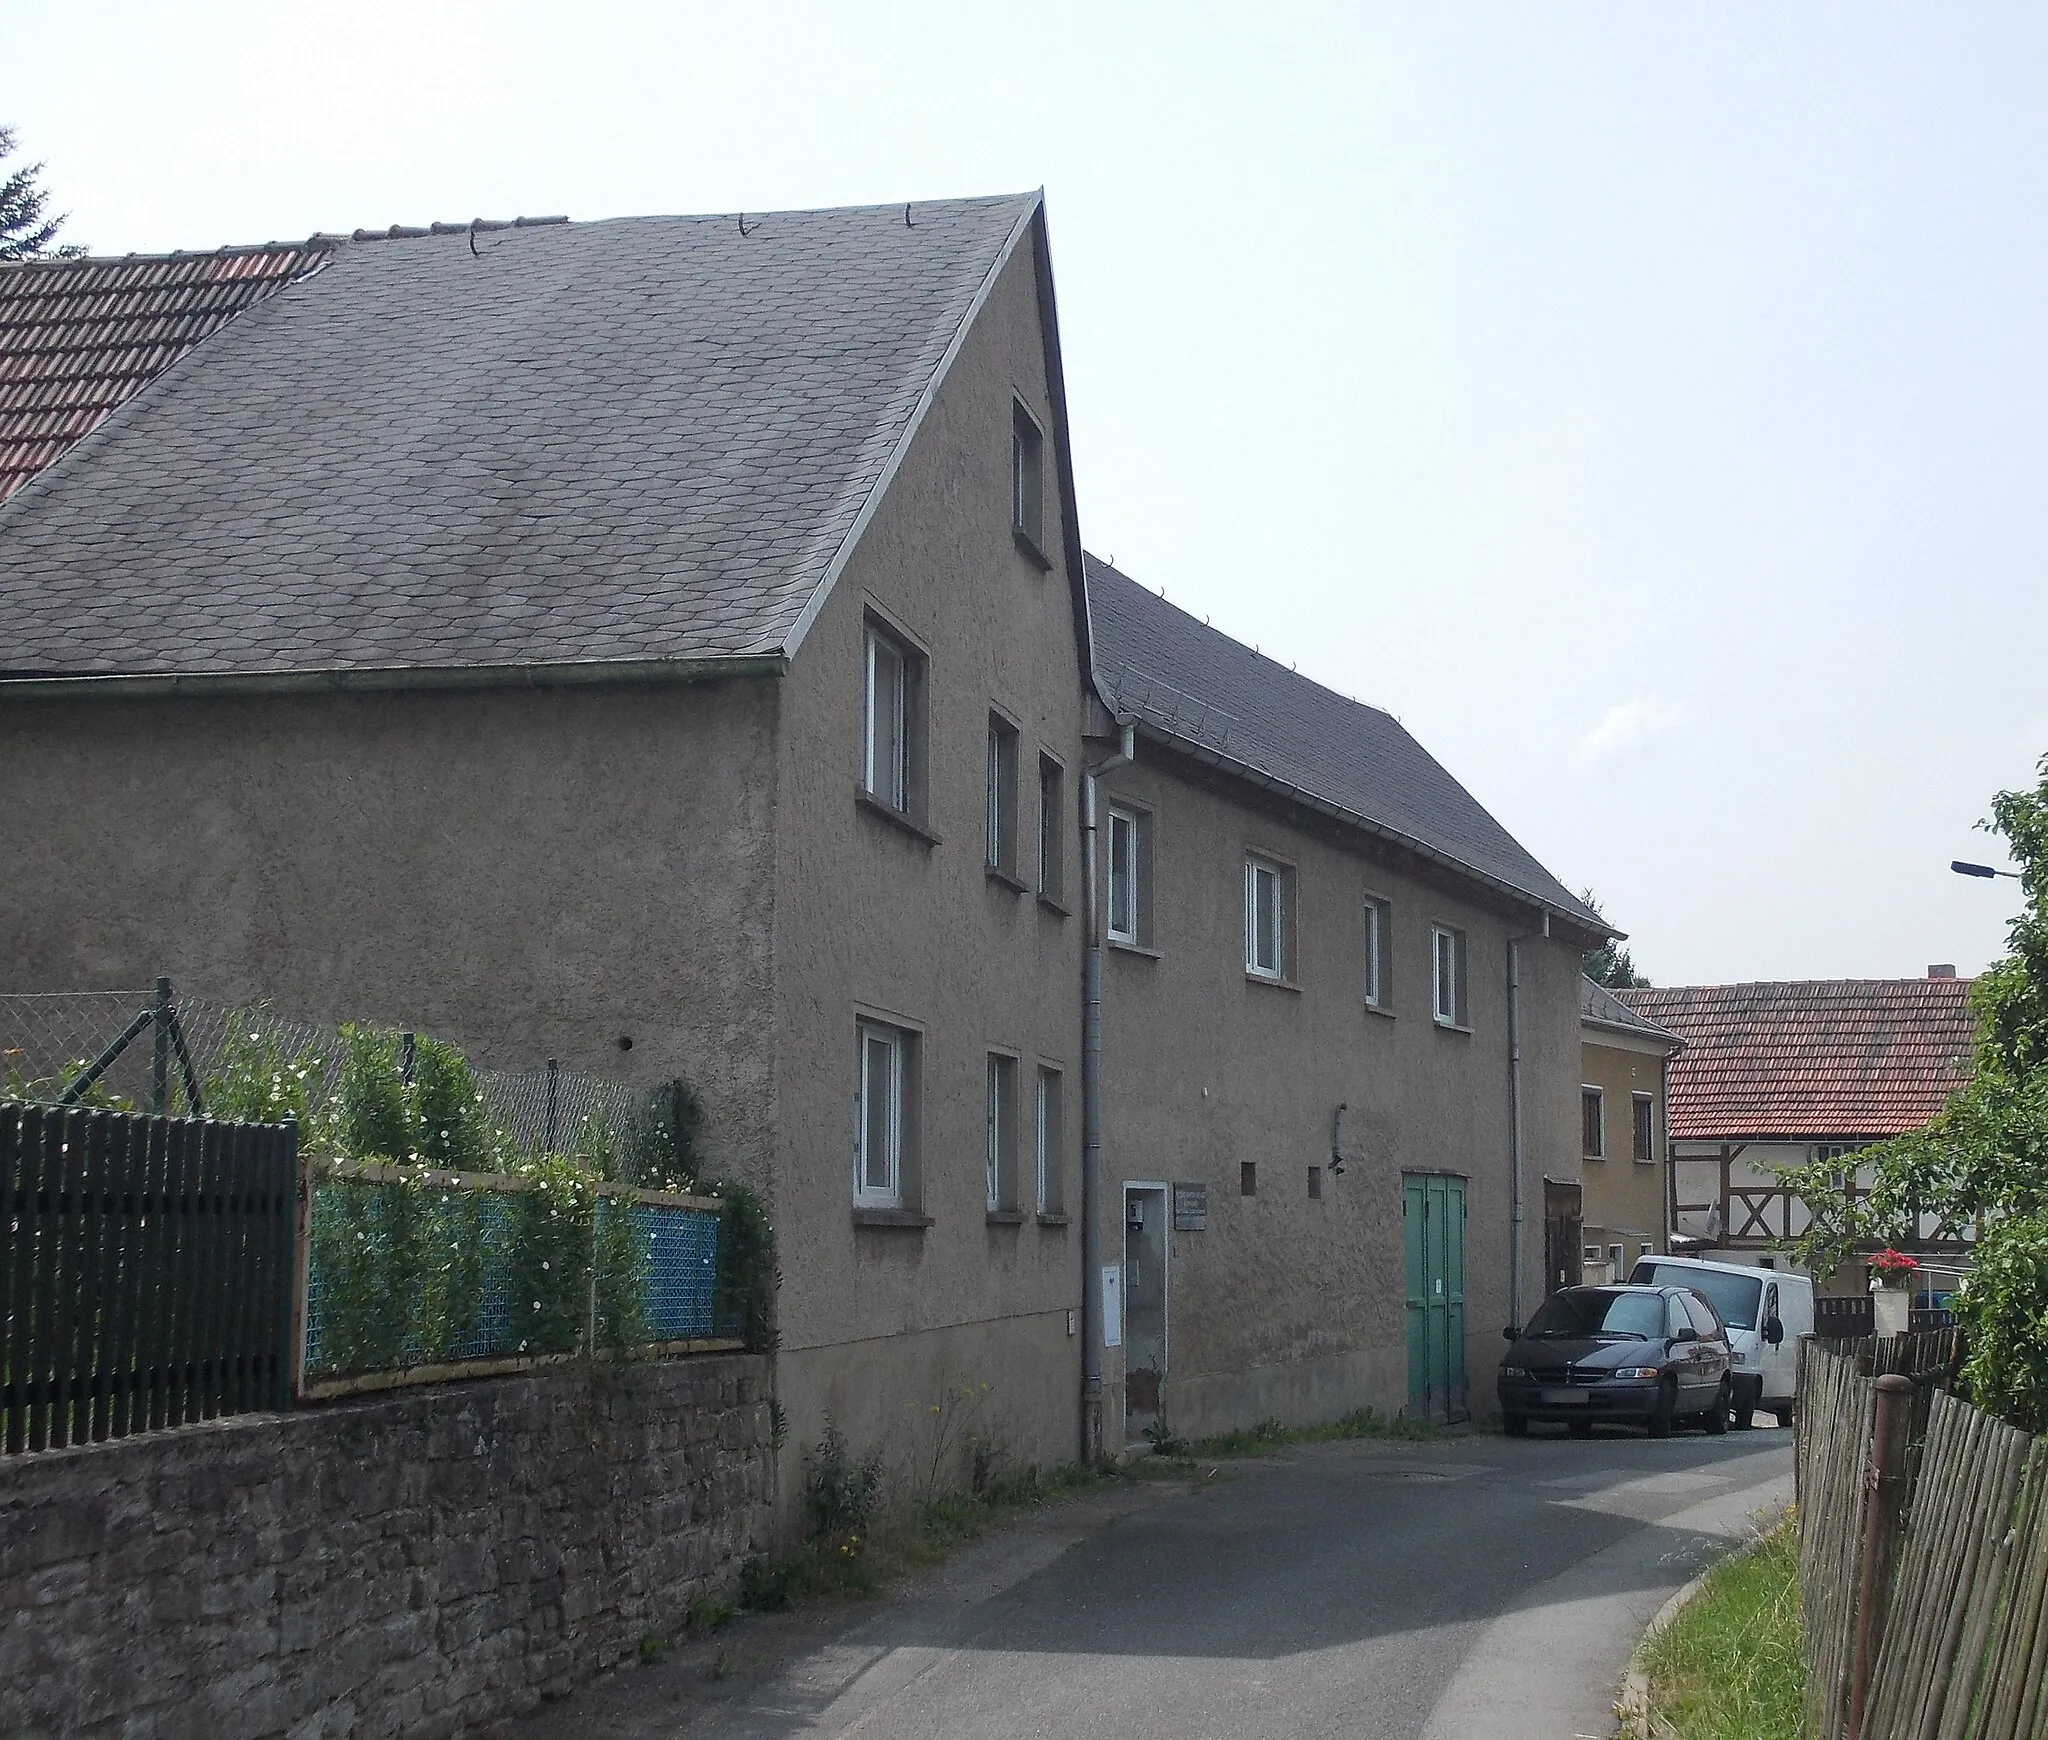 Photo showing: No. 5, Berggasse in Bad Köstritz (Greiz district, Thuringia), the house where the composer Georg Anton Benda spent the last years of his life